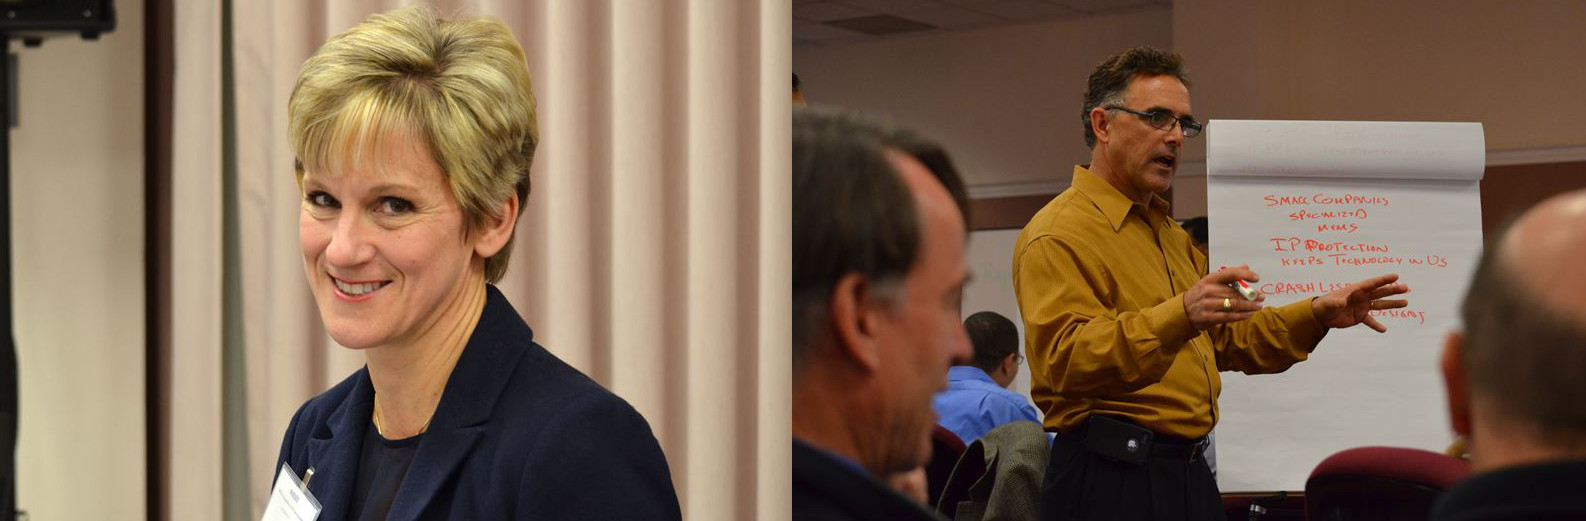 Karen McCabe, Senior Director at IEEE-SA (left) and participative roundtable (right)